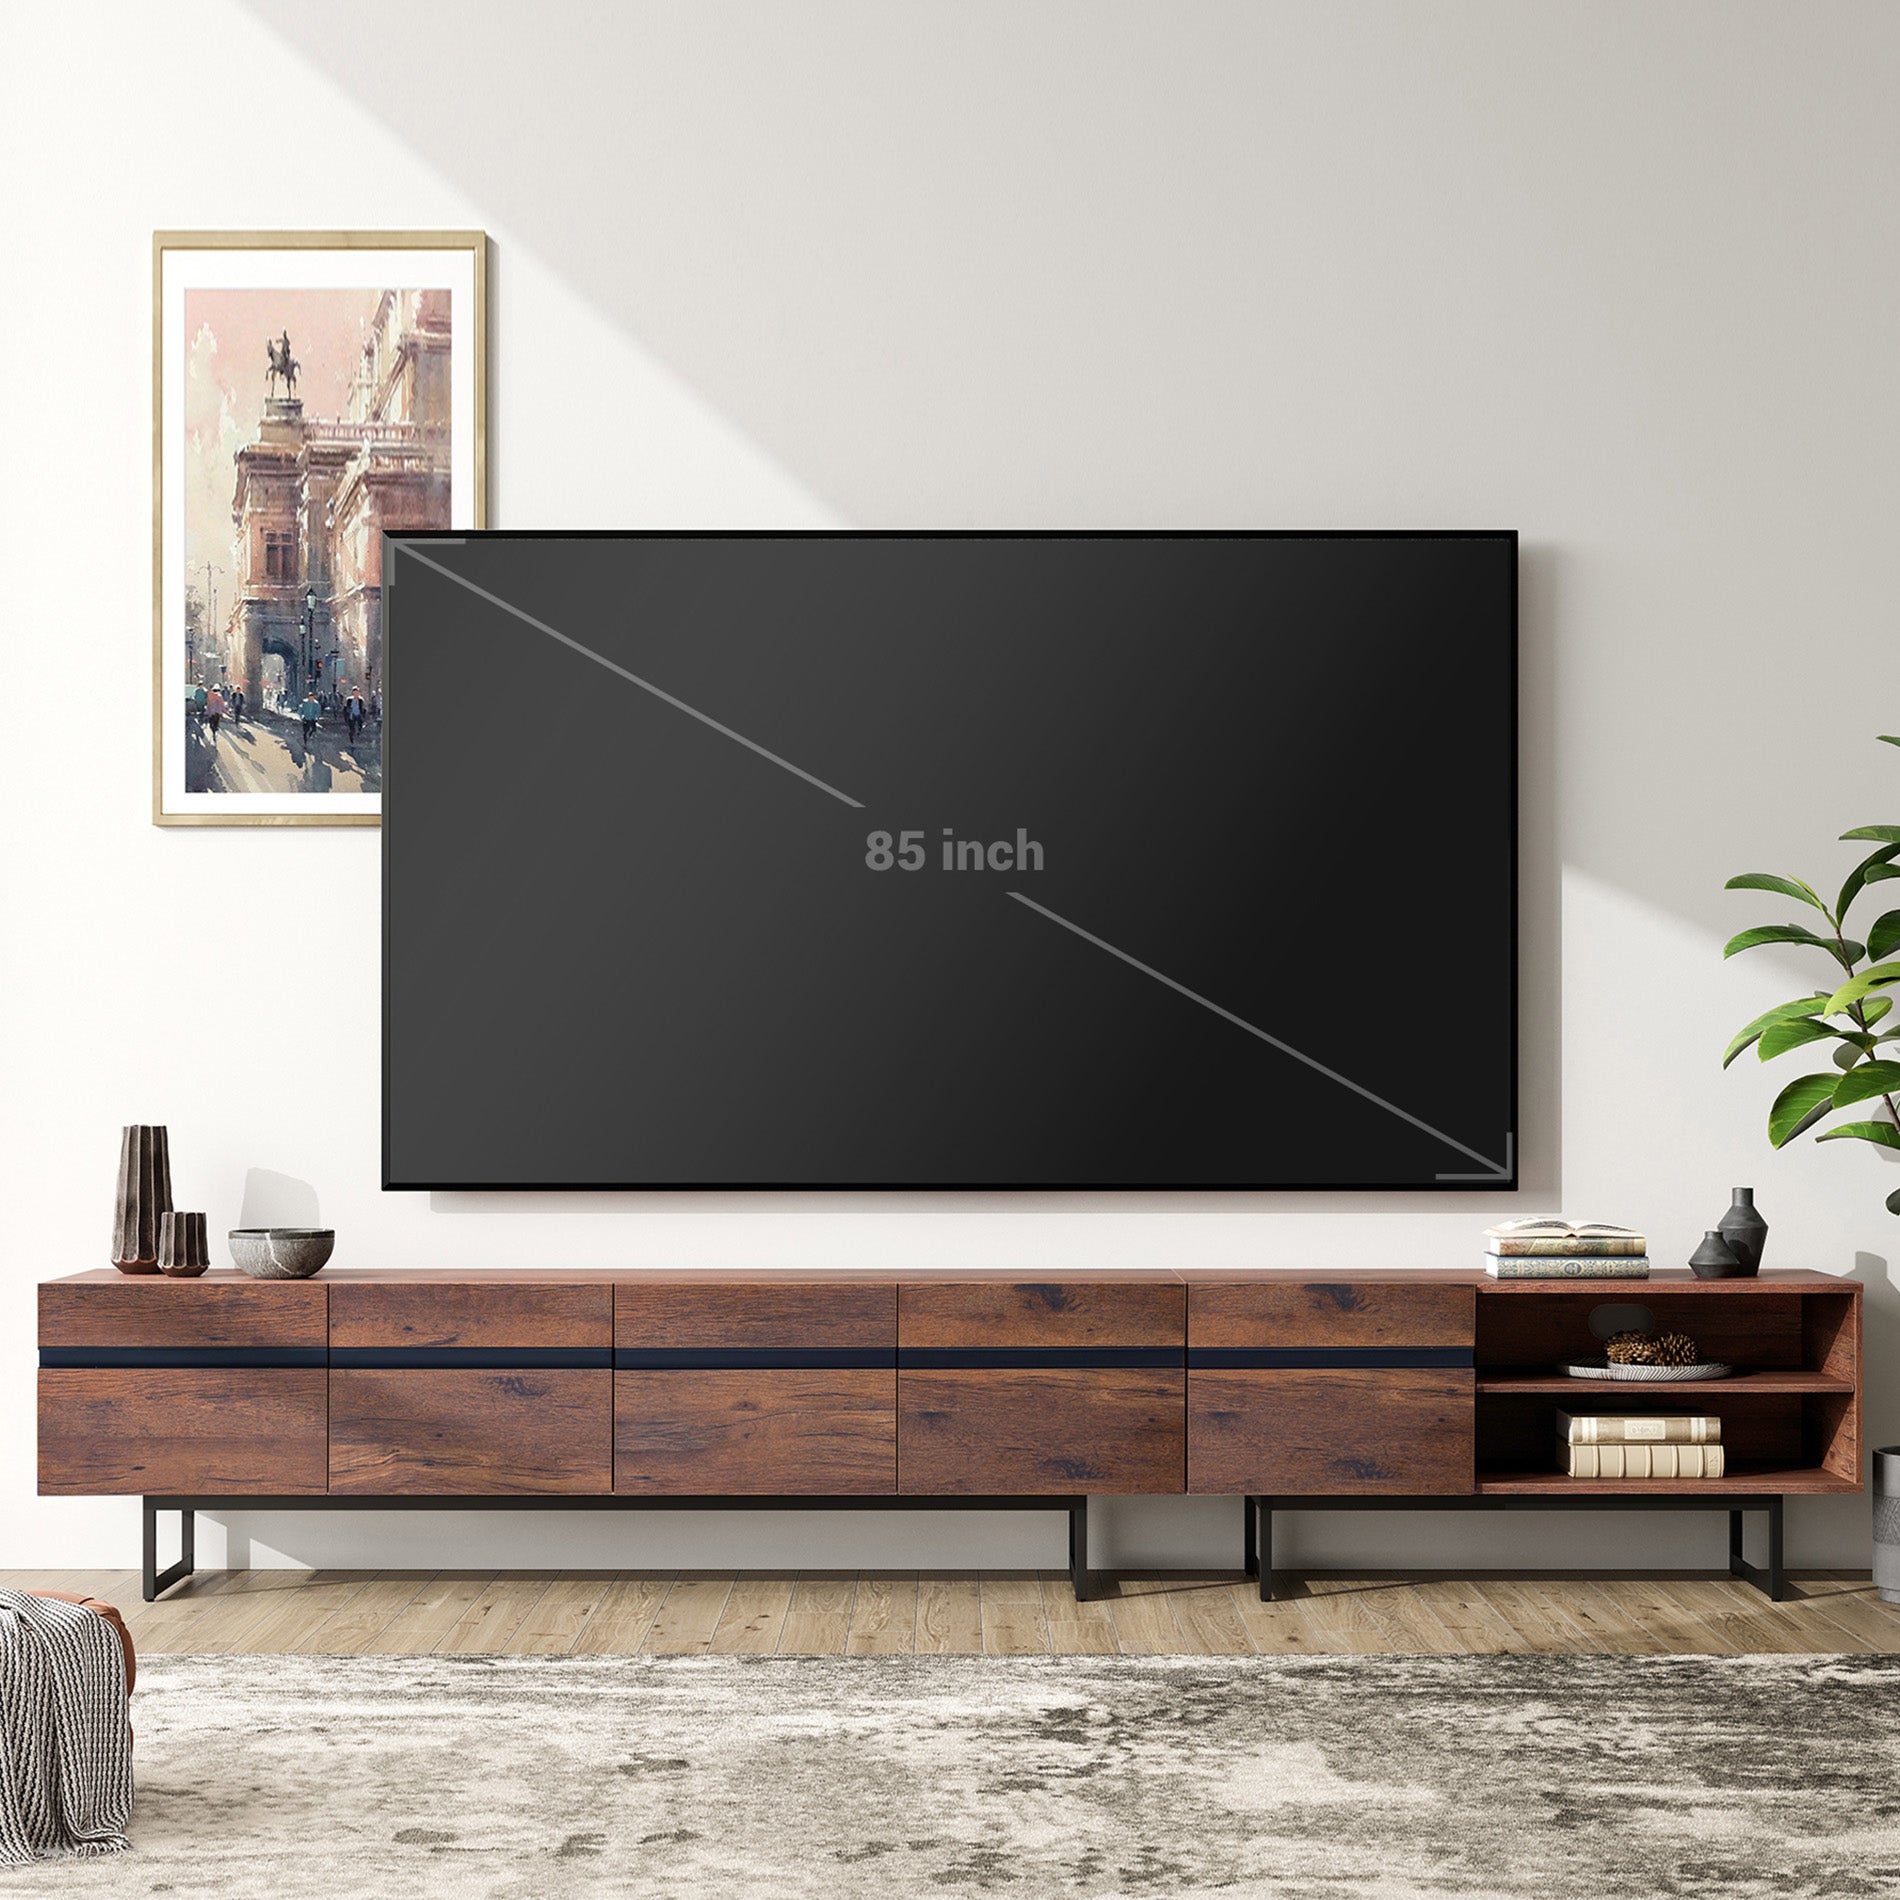 LED TV Stand for TVs up to 100 Inch, Modern Wood Entertainment